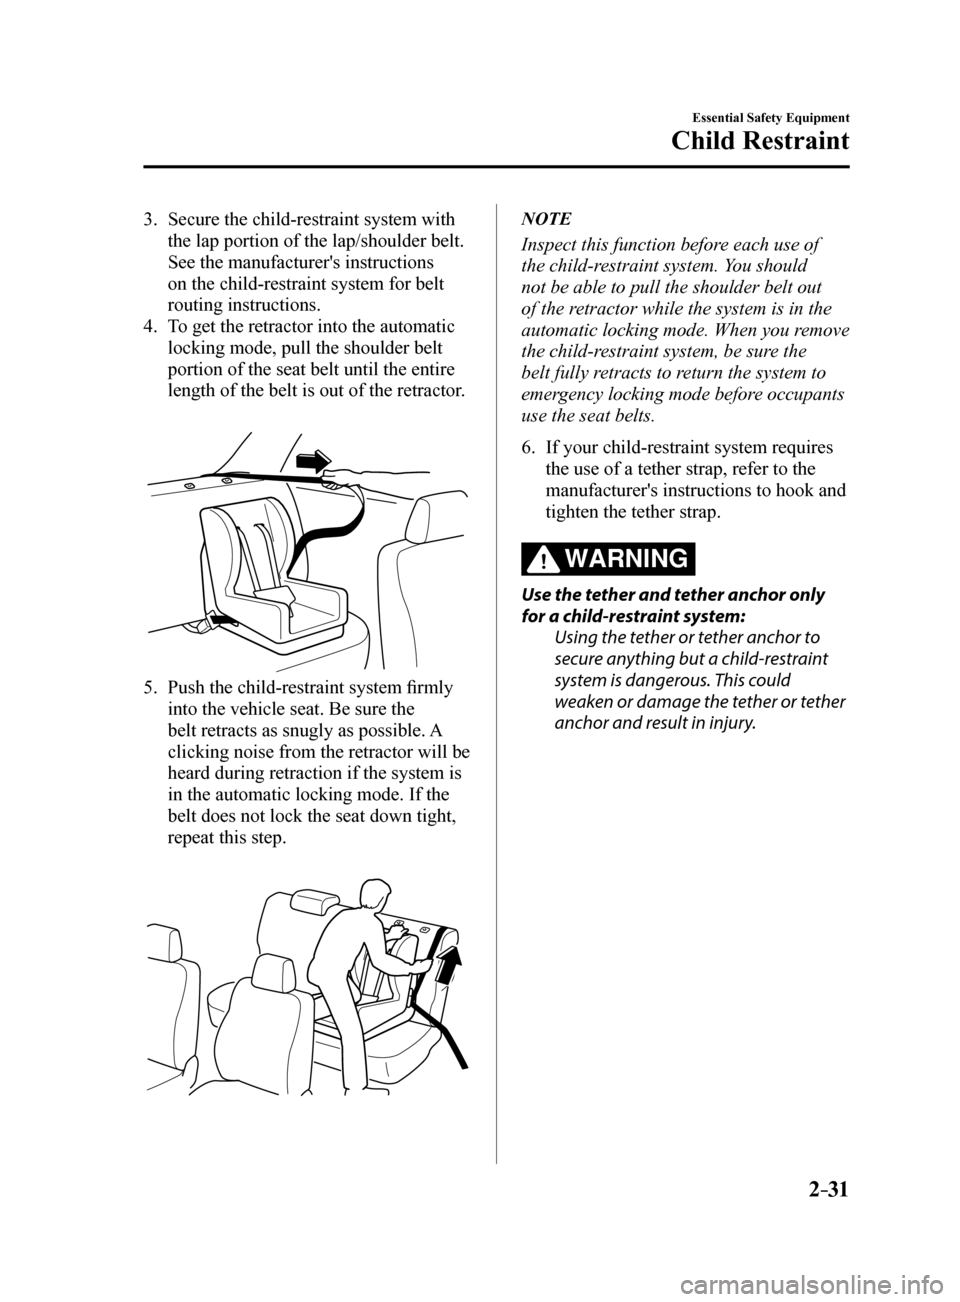 MAZDA MODEL 6 2017  Owners Manual (in English) 2–31
Essential Safety Equipment
Child Restraint
3. Secure the child-restraint system with 
the lap portion of the lap/shoulder belt. 
See the manufacturers instructions 
on the child-restraint syst